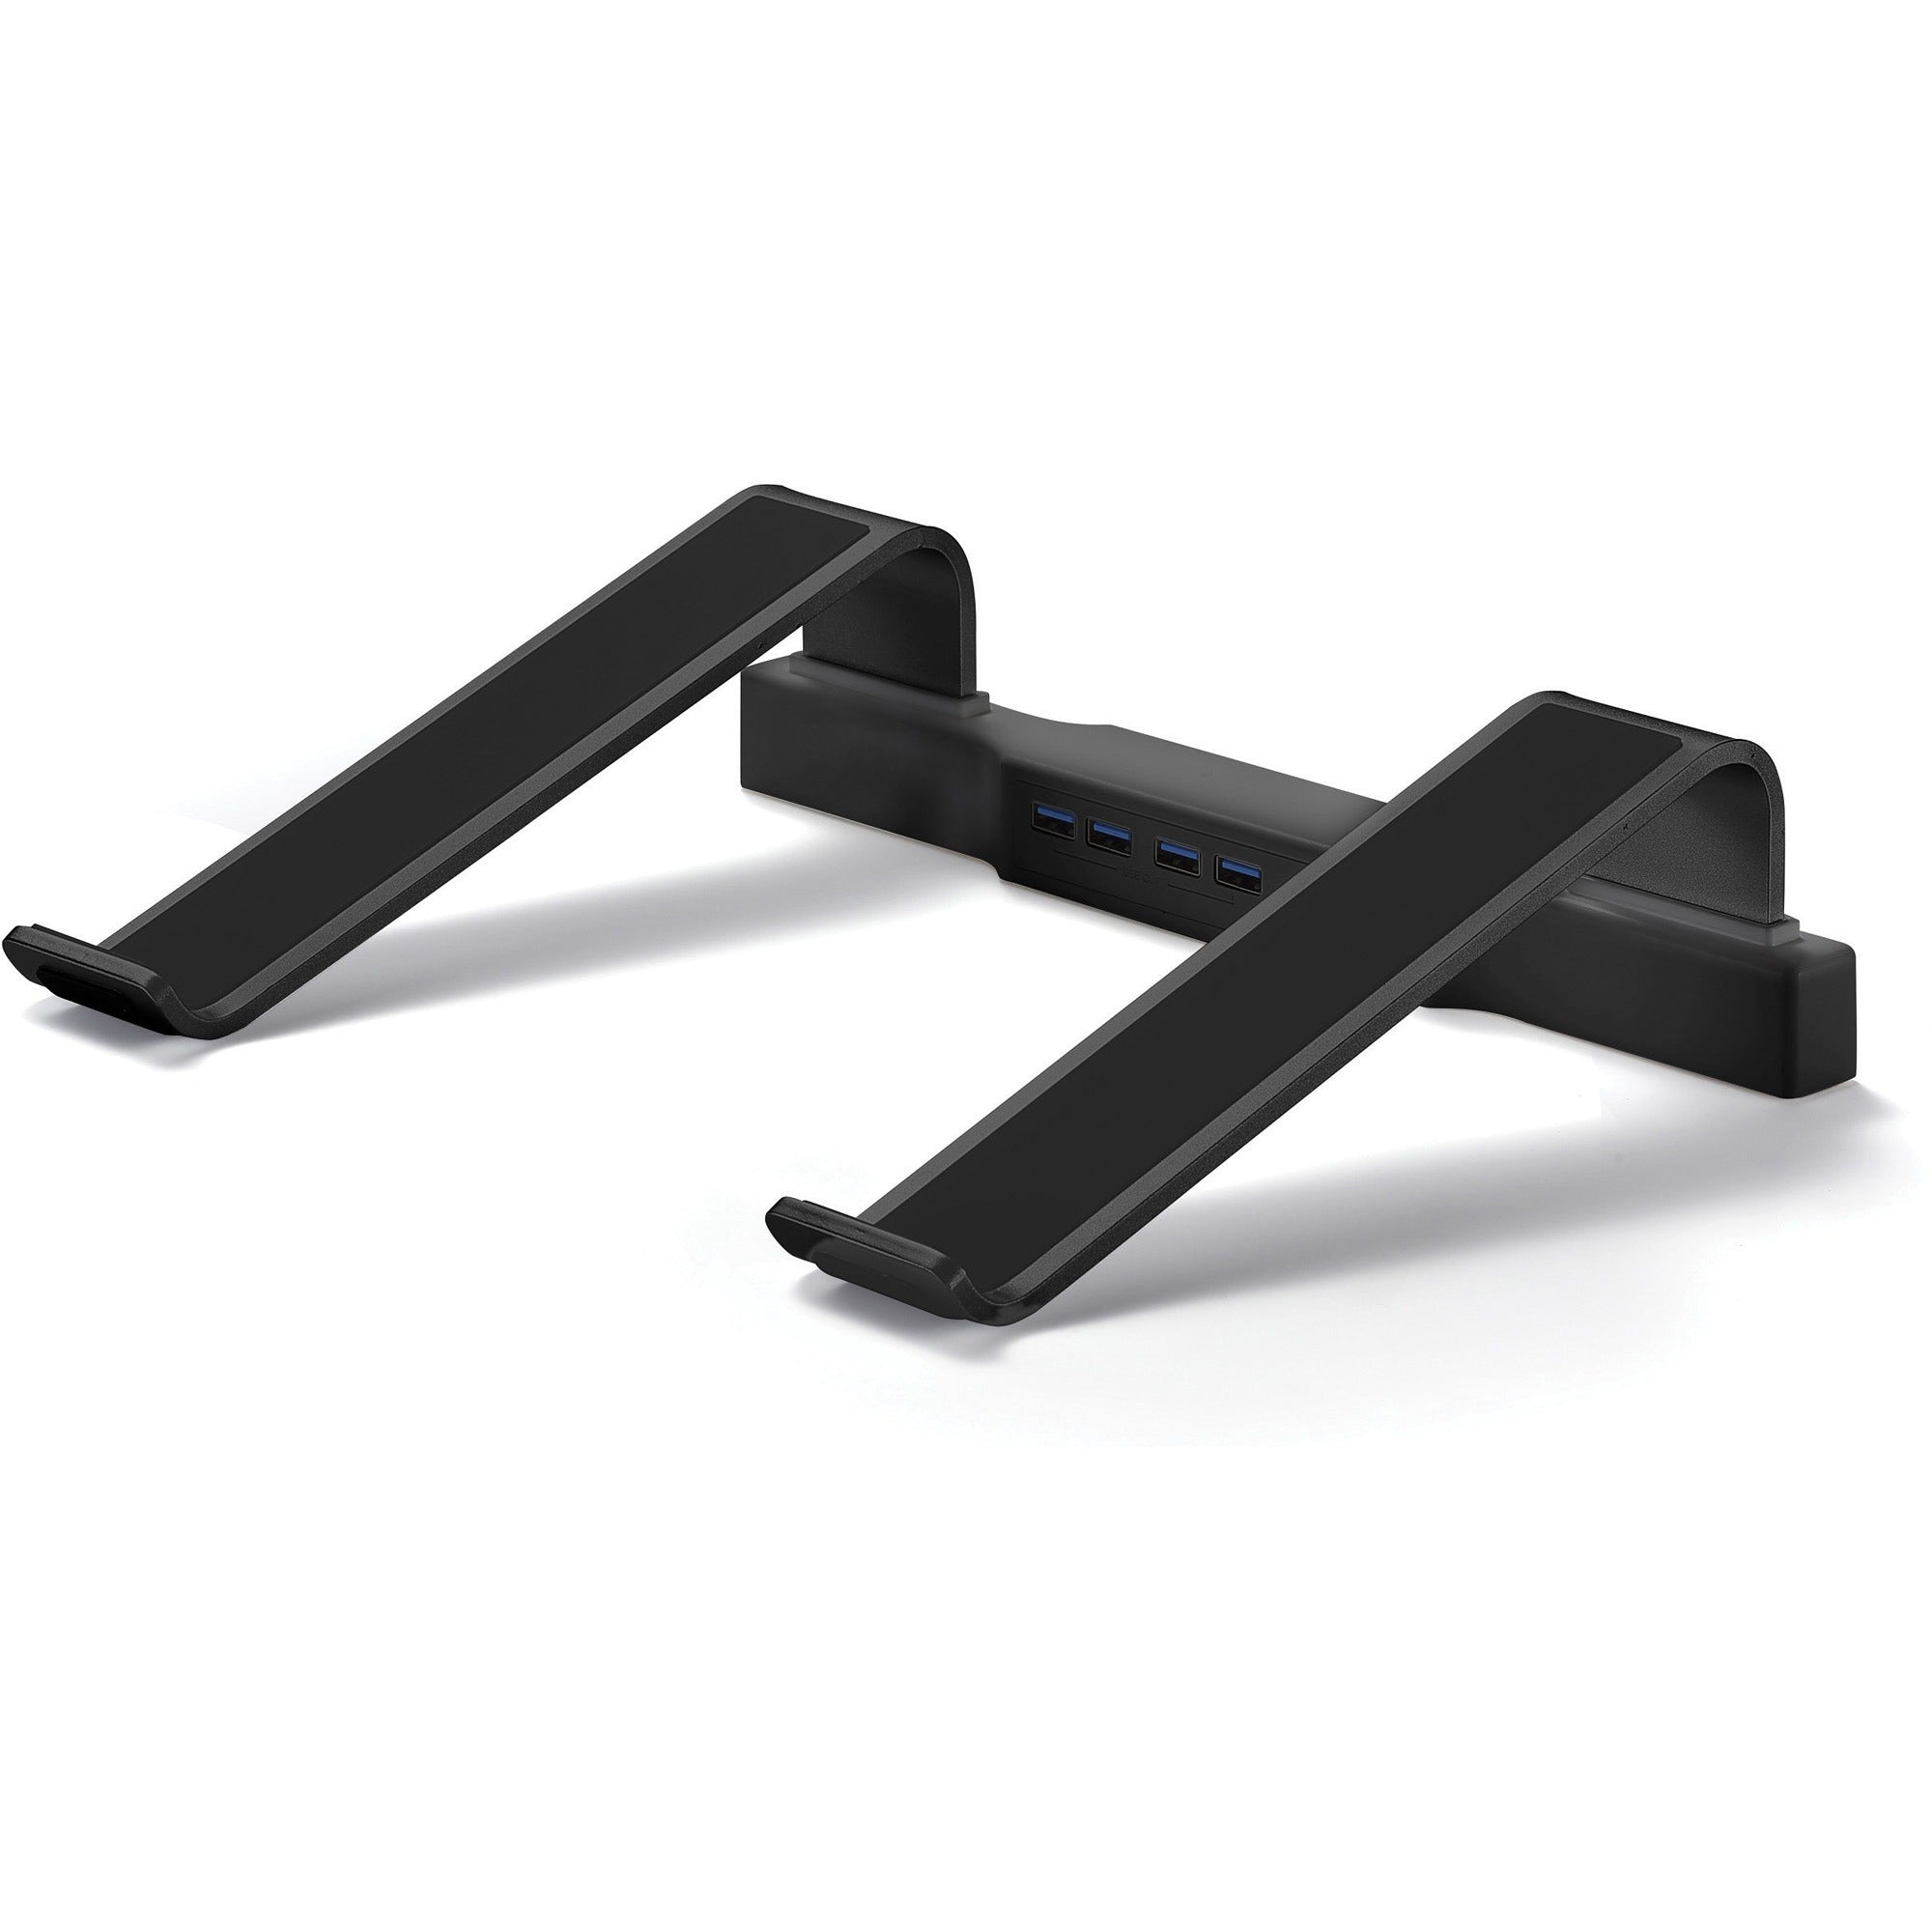 dac-non-skid-laptop-stand-with-4-port-usb-30-hub-3-height-x-98-width-aluminum-alloy-black_dta21680 - 1